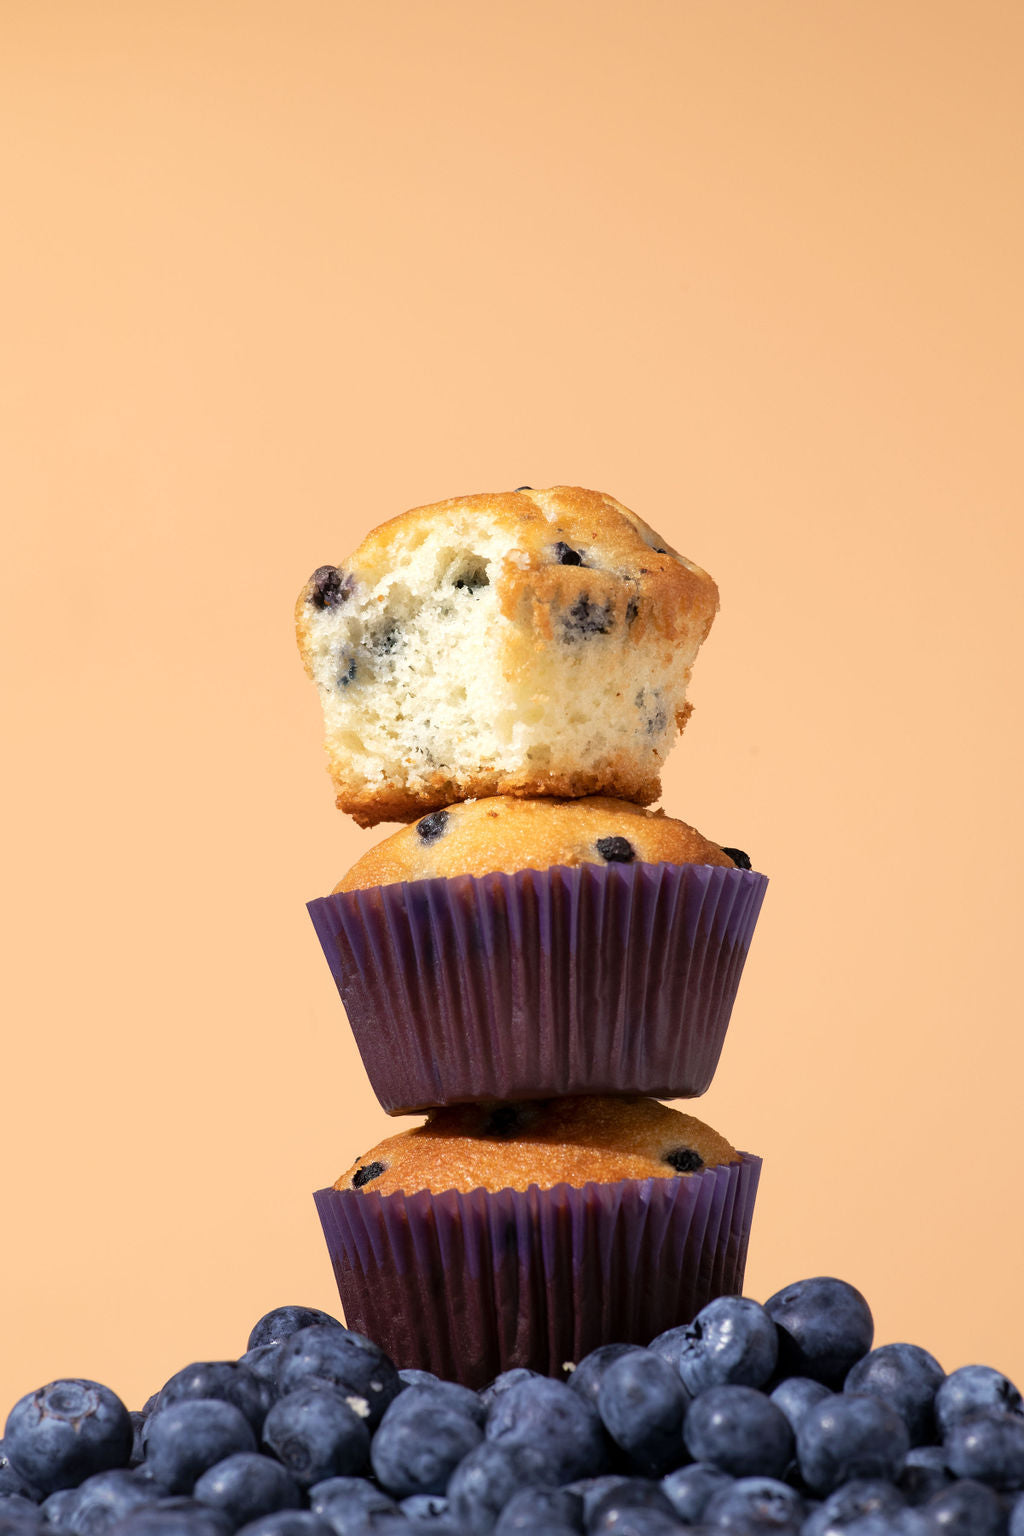 **Revitalize Your Morning Routine: Indulge in Irresistible Oatmeal Blueberry Muffins**